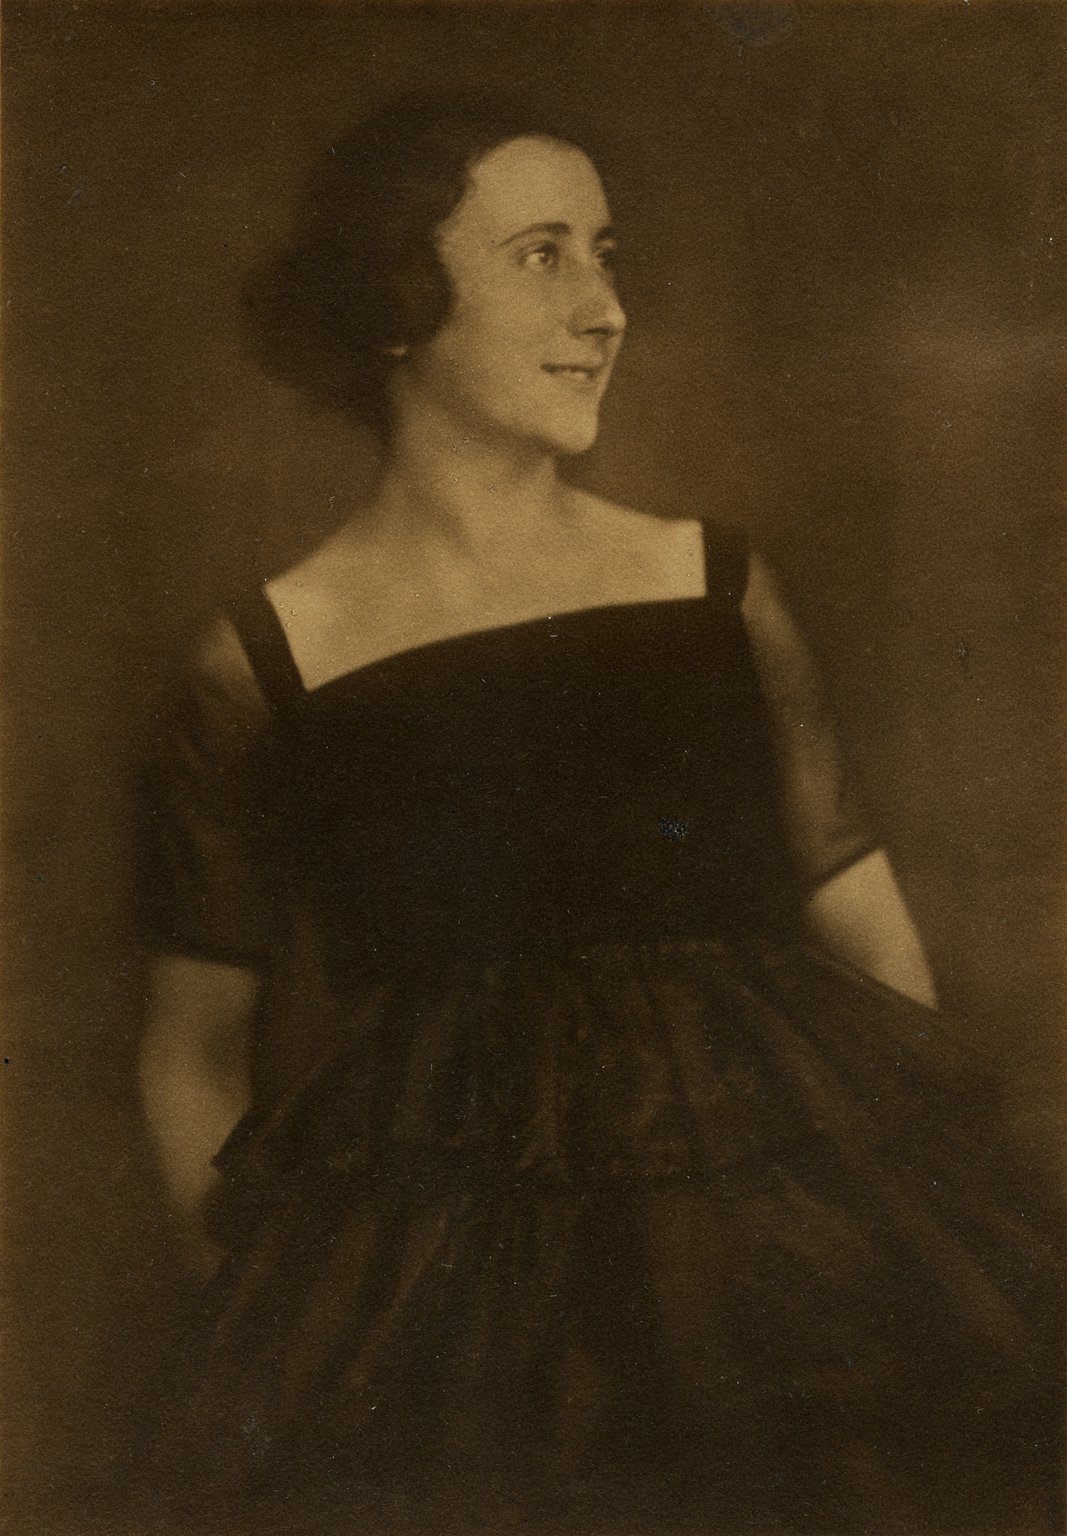 Edith Holländer as a young woman in evening dress, 1920s.